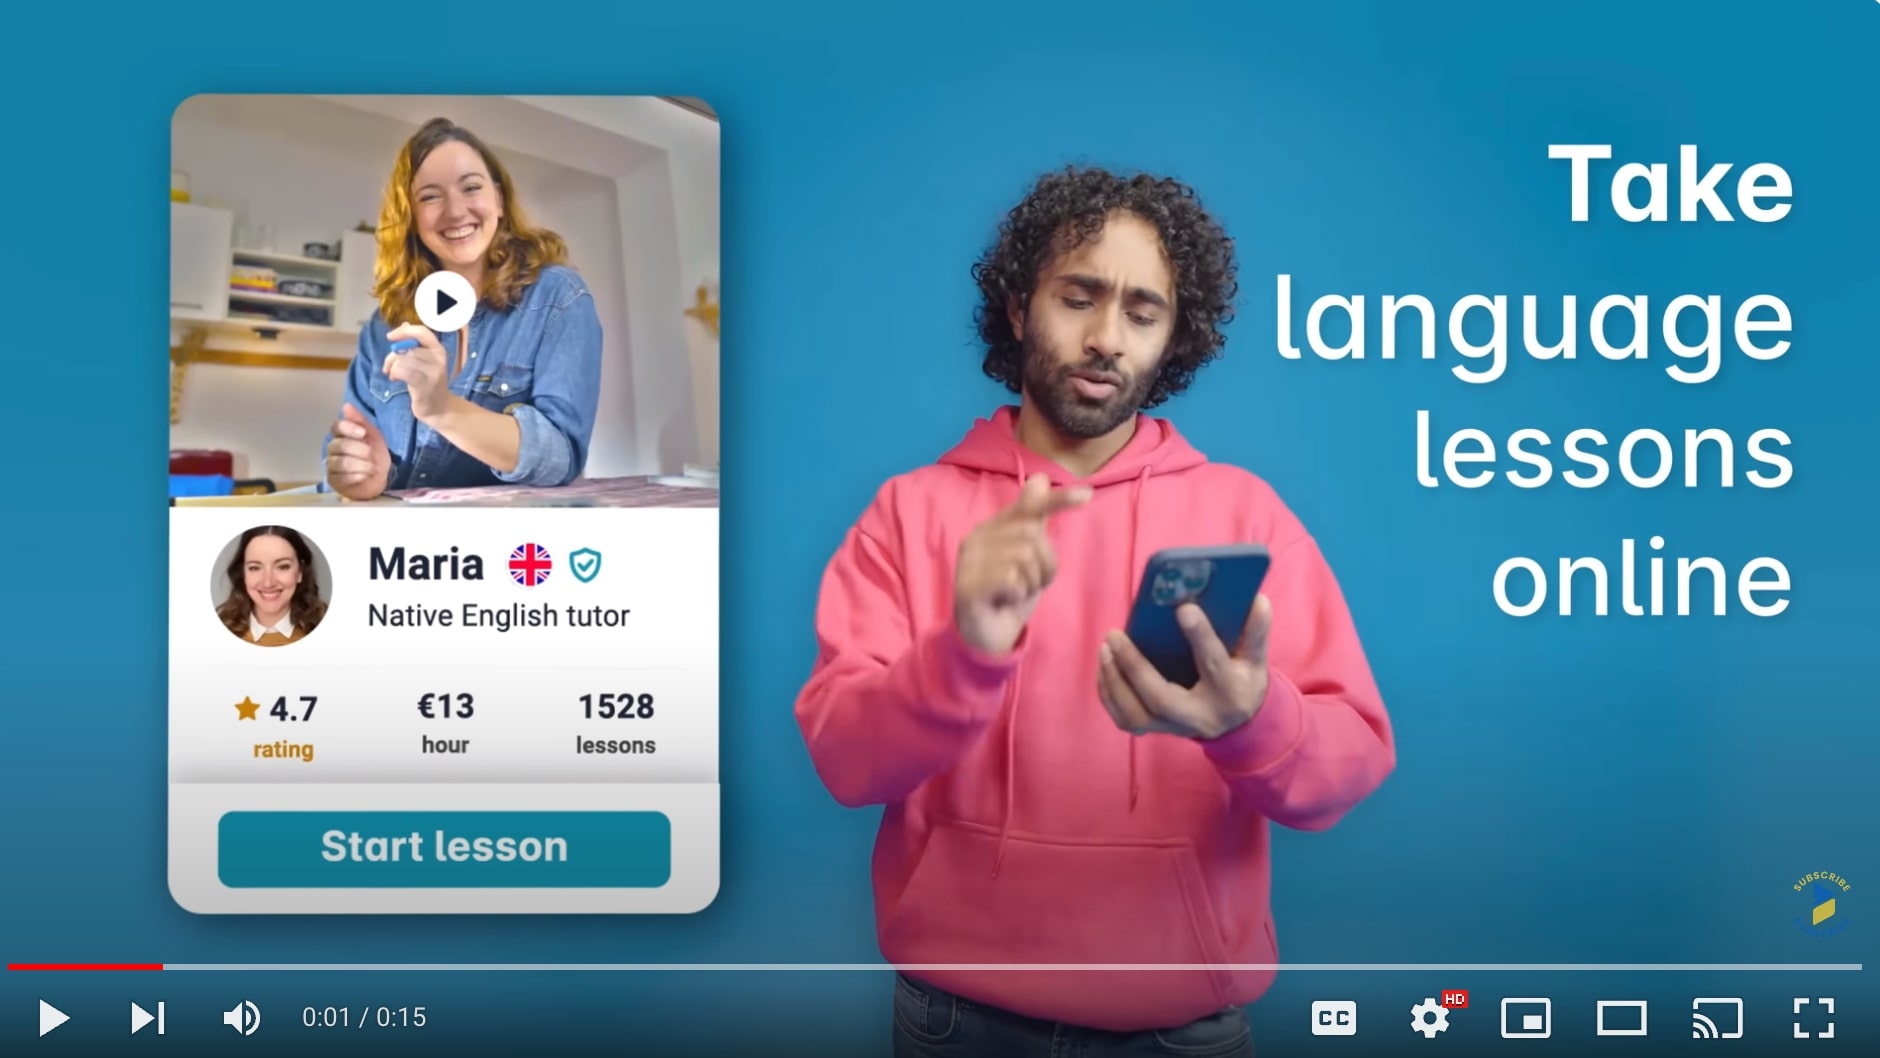 Preply's video ad with subtitles "Take language lessons online"